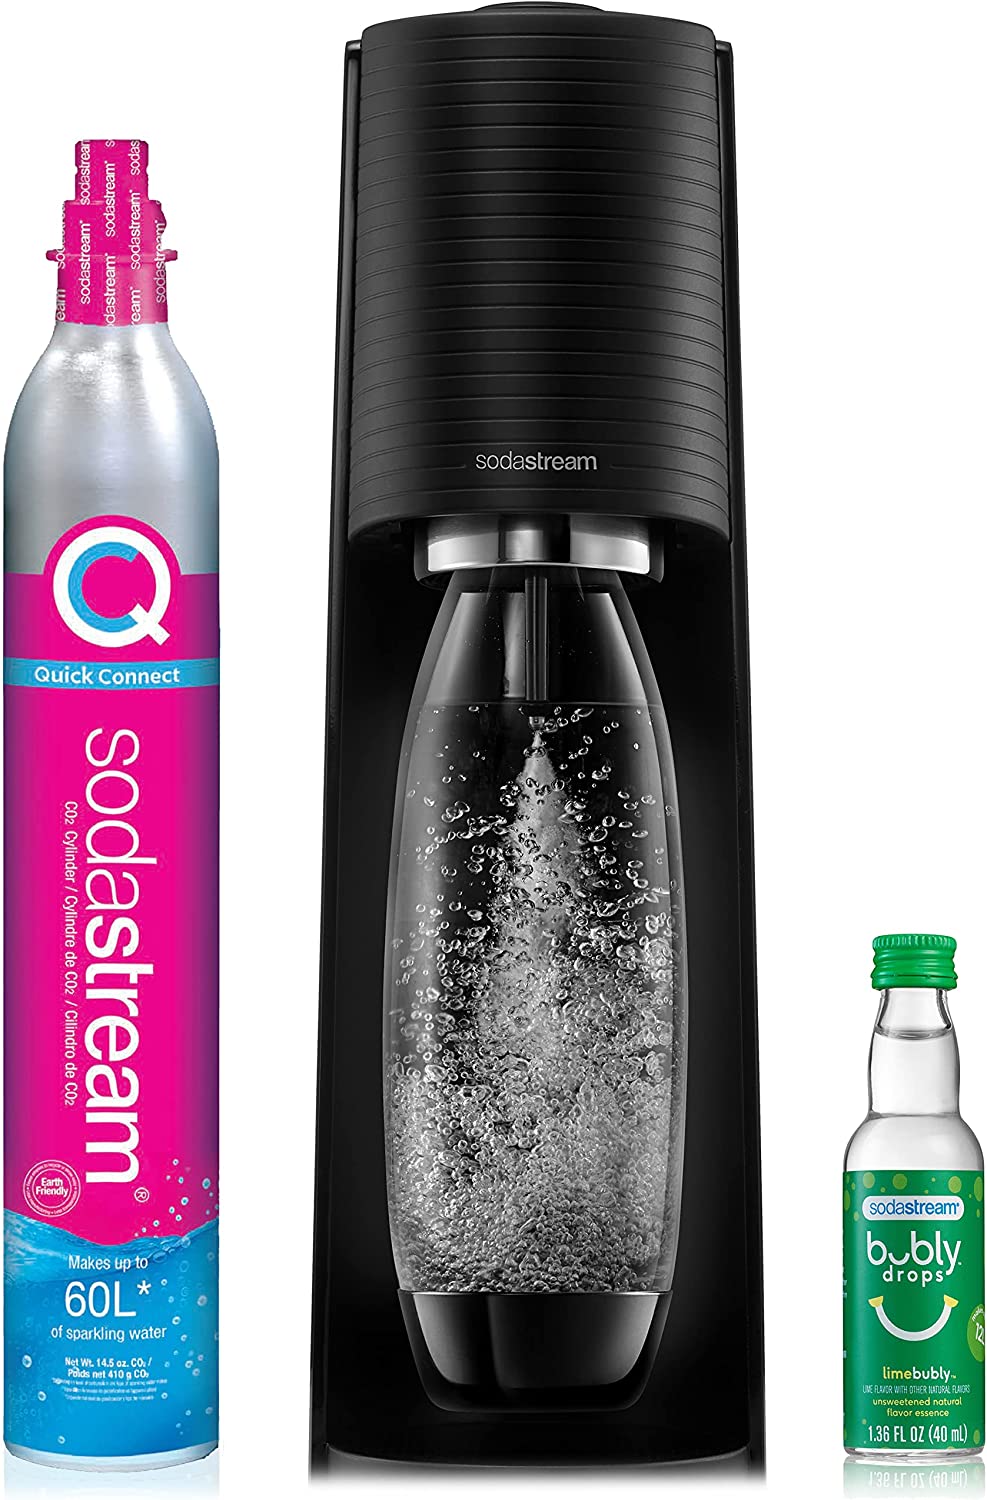 carbonated water maker review